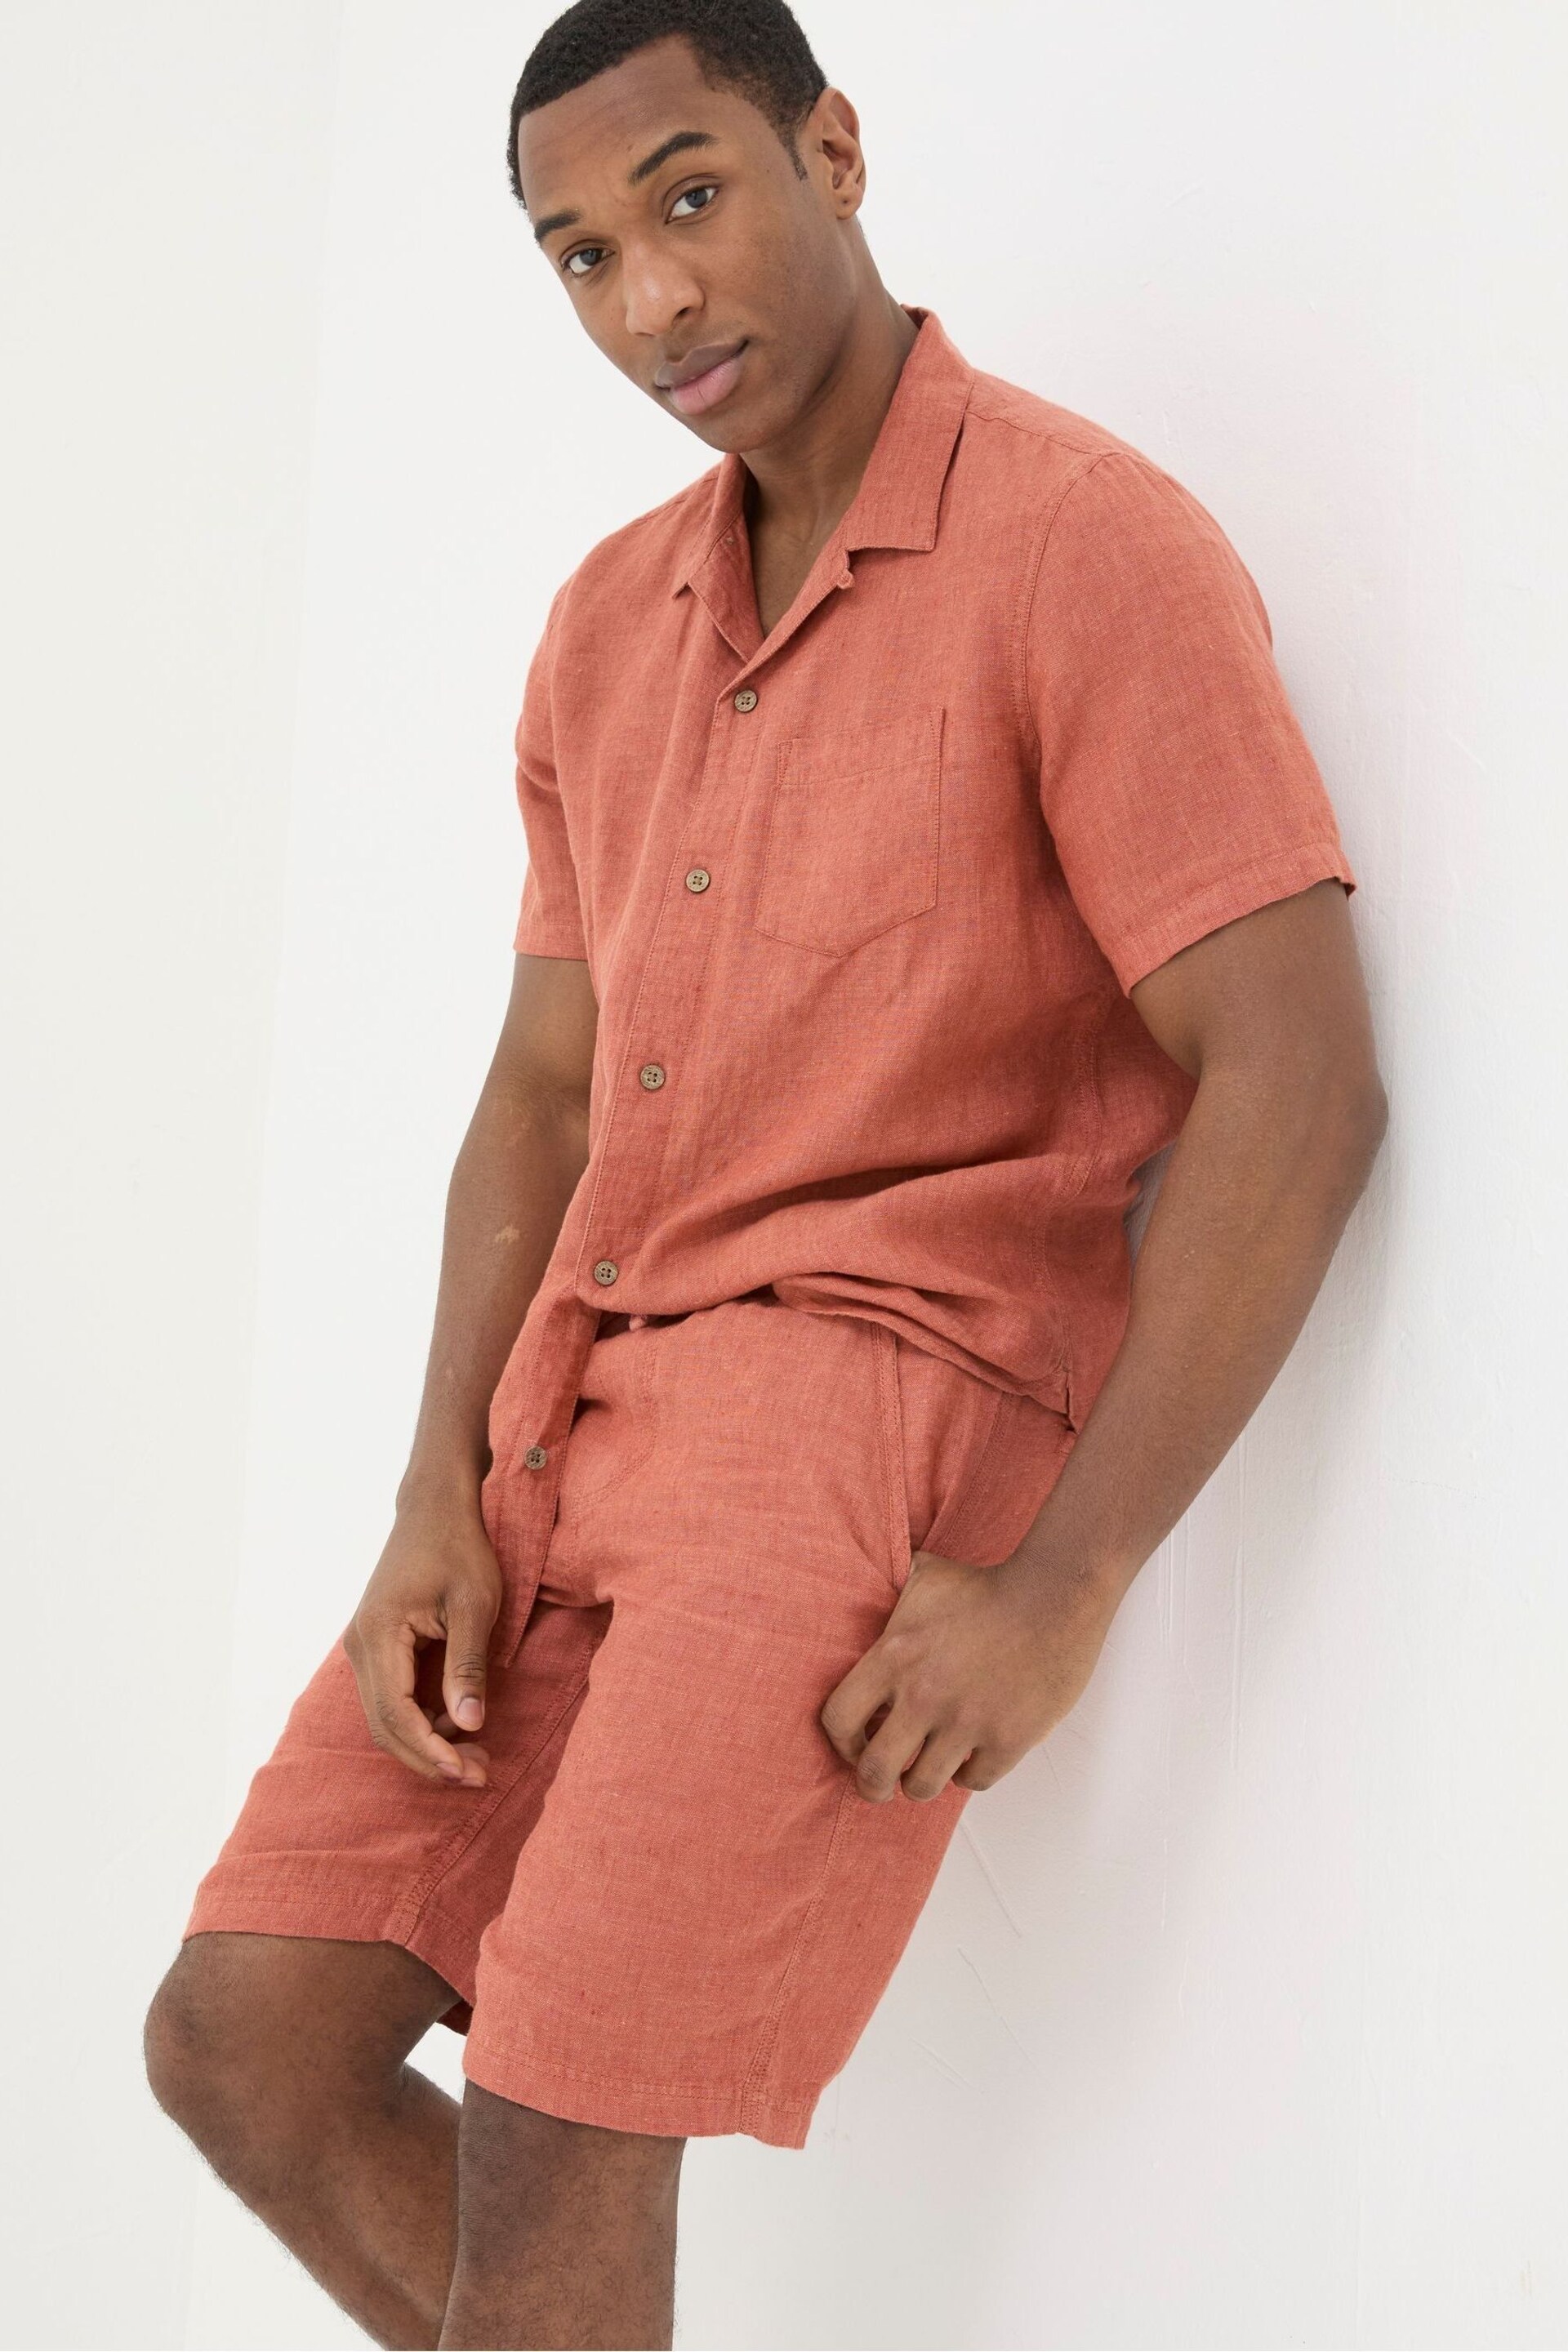 FatFace Orange Linen Pull On Shorts - Image 2 of 6